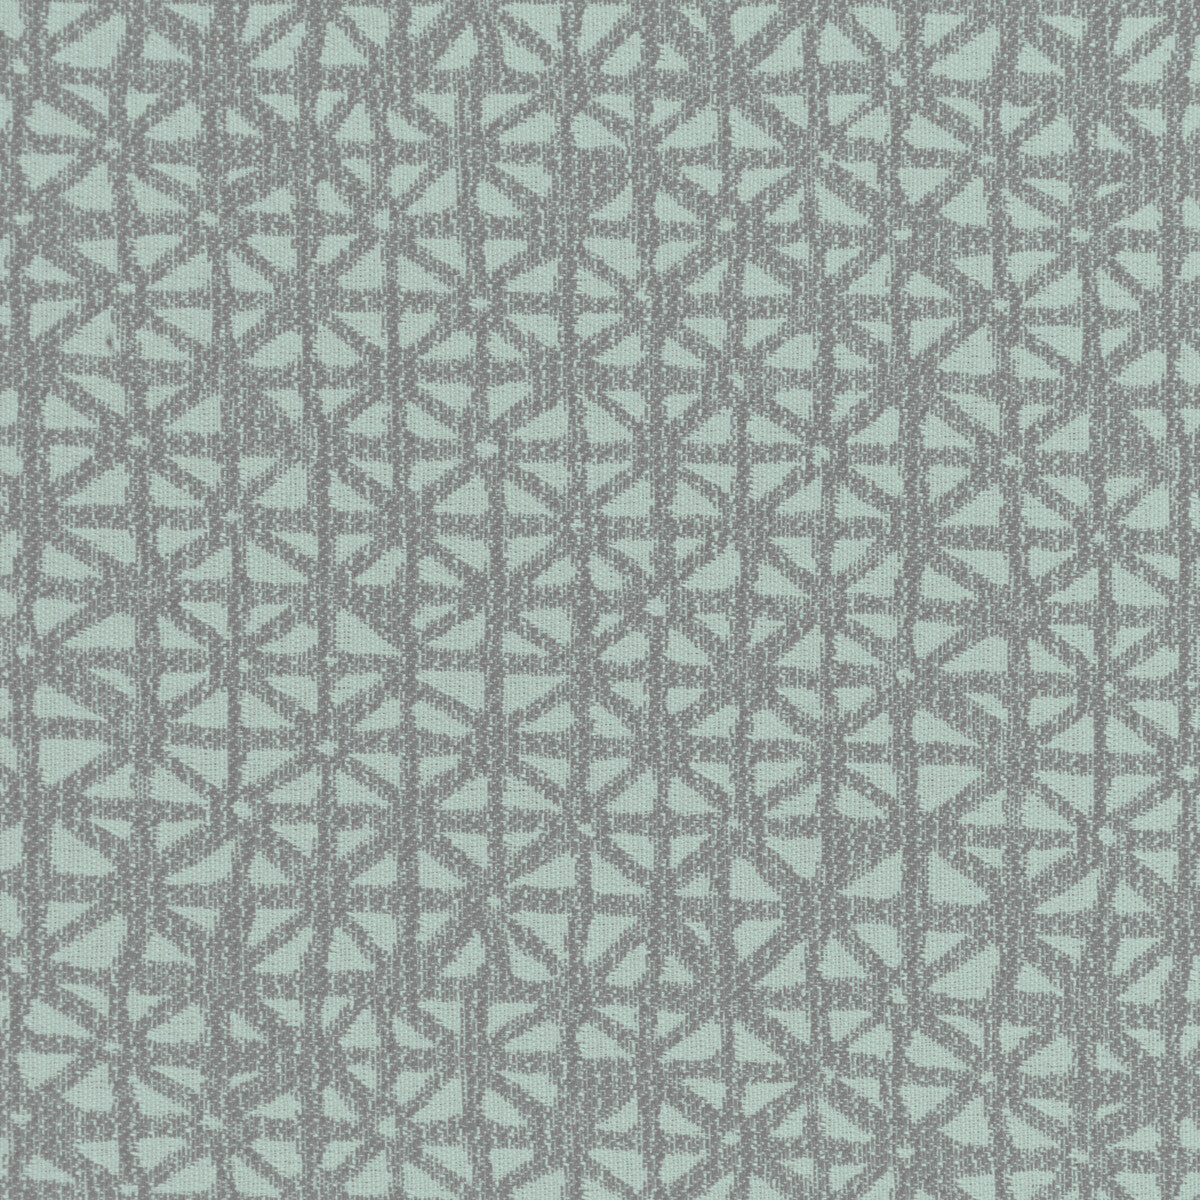 Kinzie fabric in sea glass color - pattern 36268.1511.0 - by Kravet Contract in the Gis Crypton collection